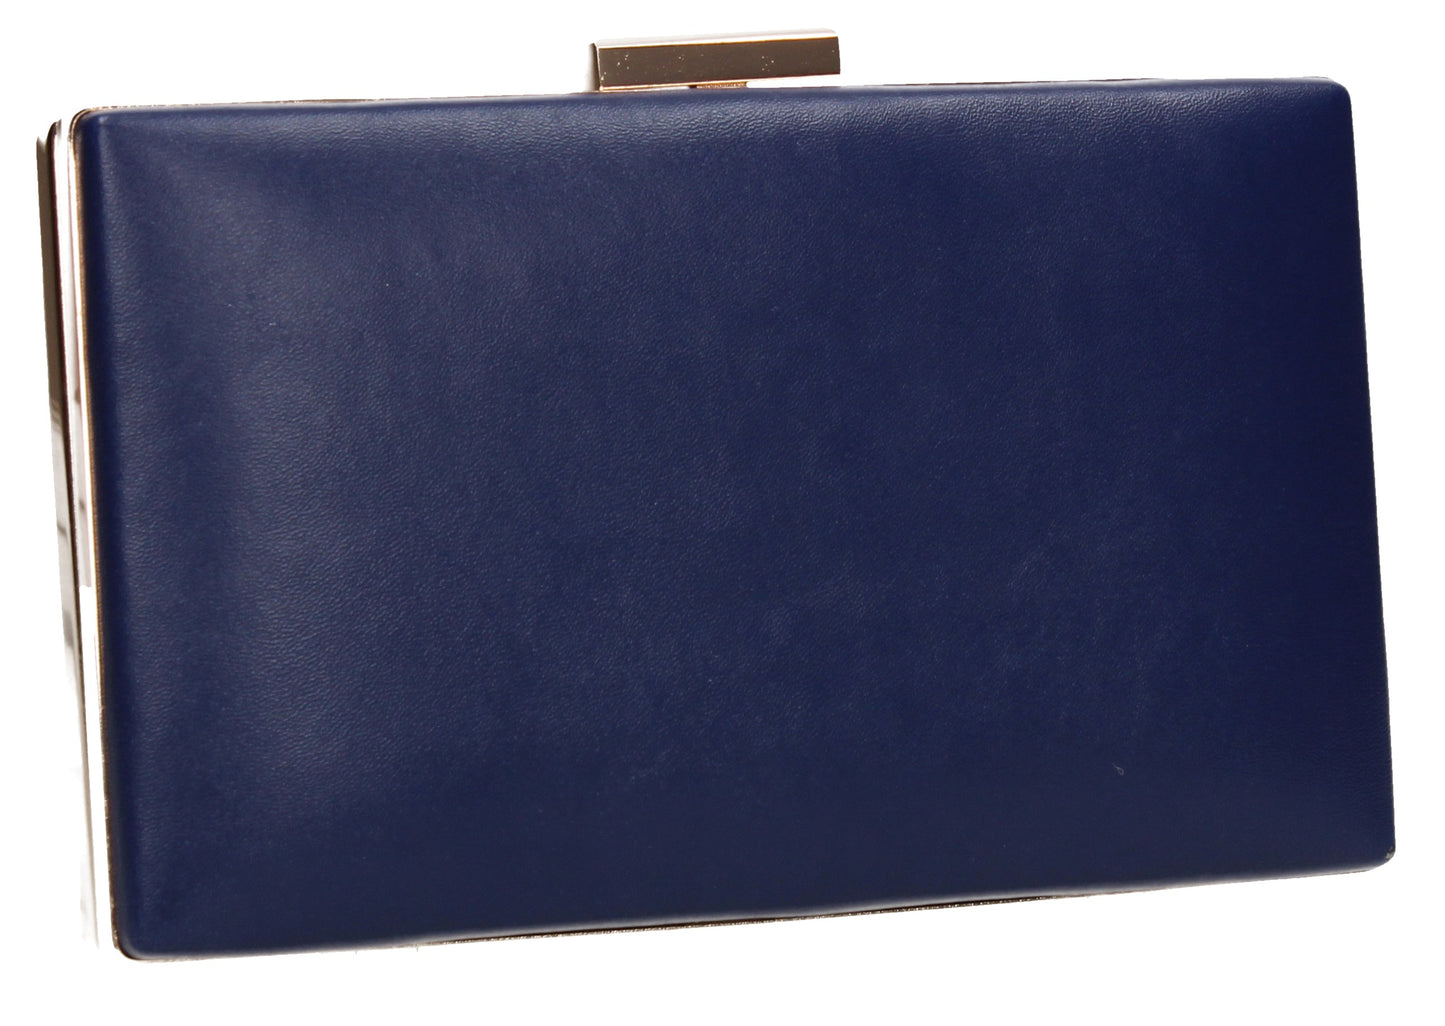 SWANKYSWANS Valery Floral Detail Clutch Bag Navy Cute Cheap Clutch Bag For Weddings School and Work